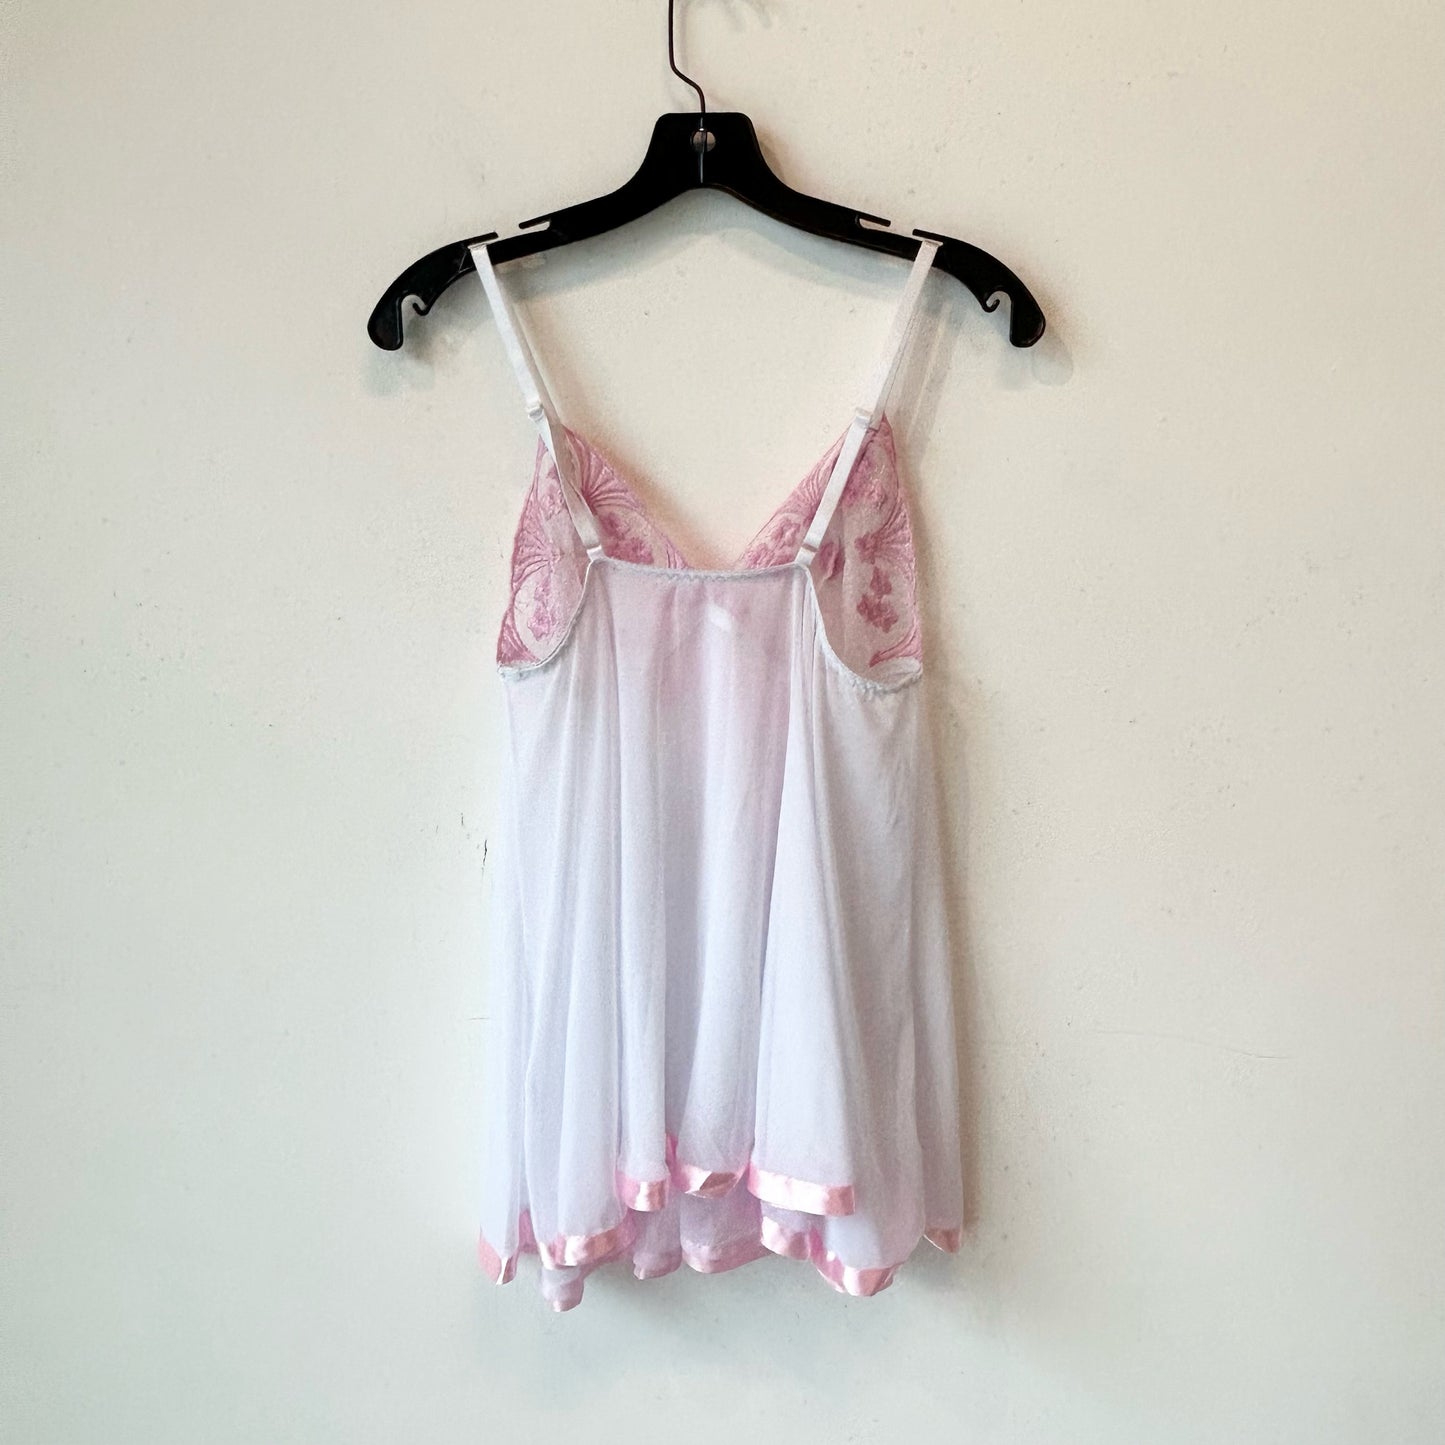 S White-Pink Lace Bow Bustier Lingerie Top